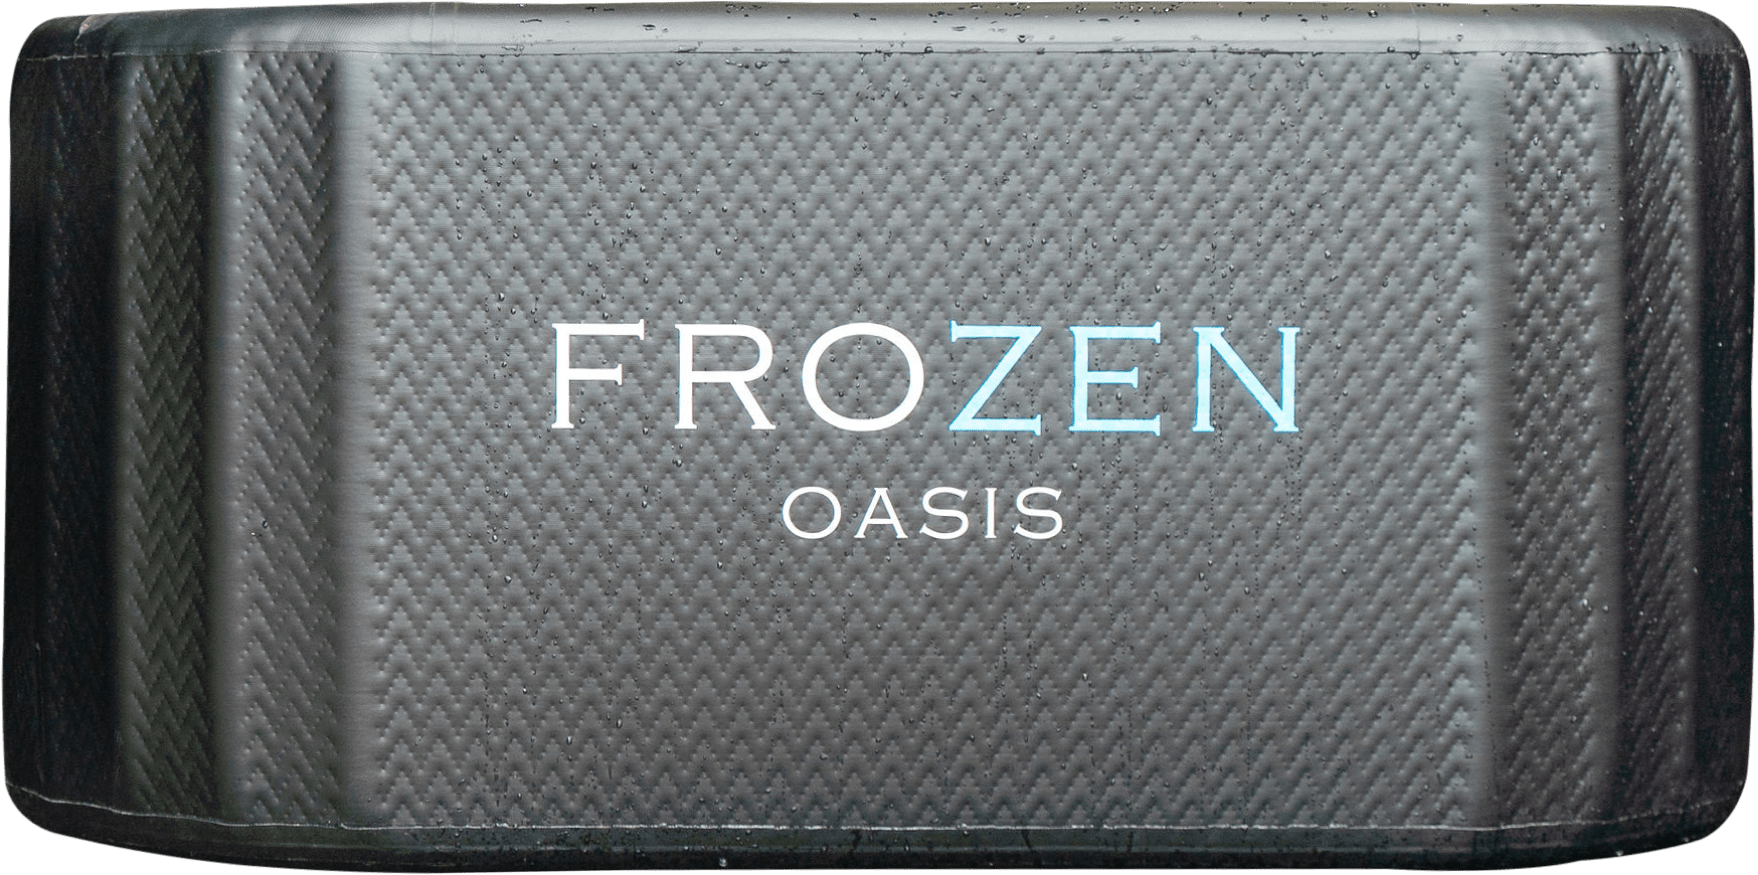 Cold plunge with Chiller (Black) - Frozen Oasis